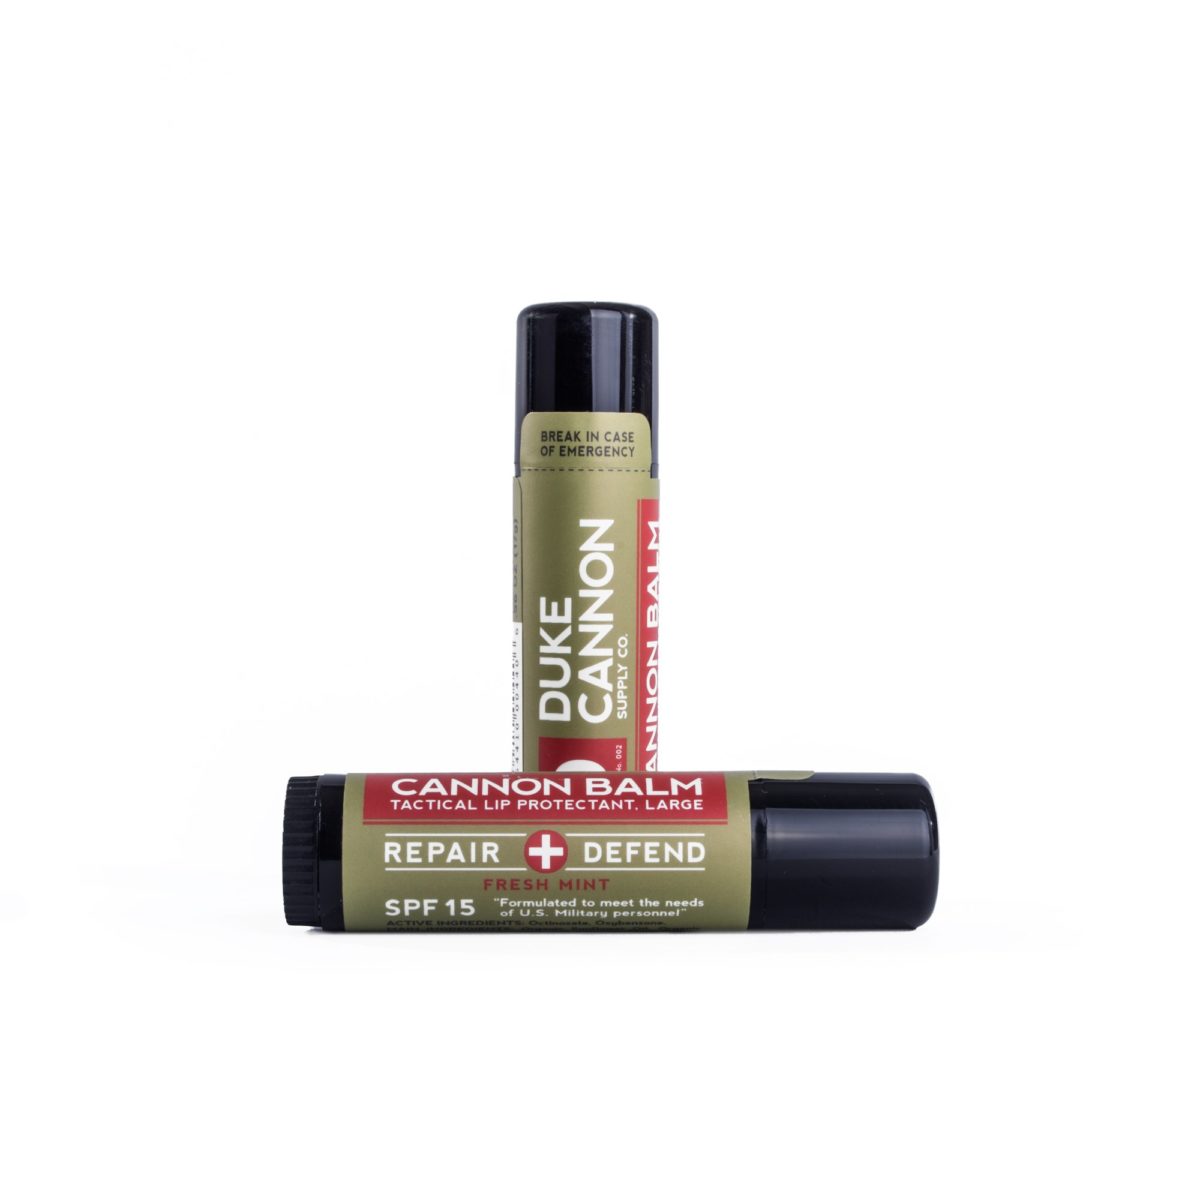 Cannon Balm TACTICAL Lip Protectant SPF 15